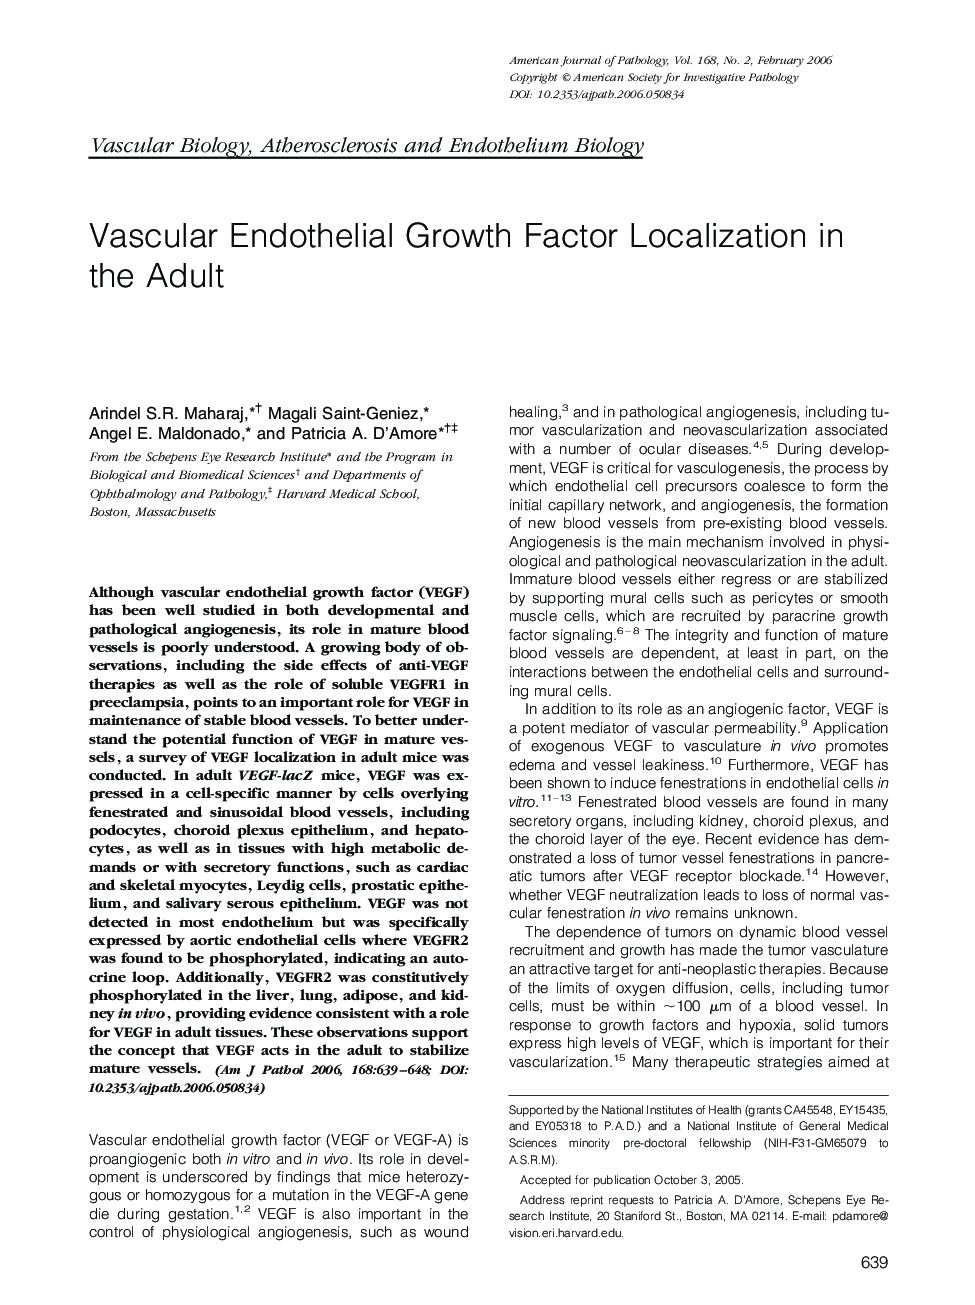 Vascular Endothelial Growth Factor Localization in the Adult